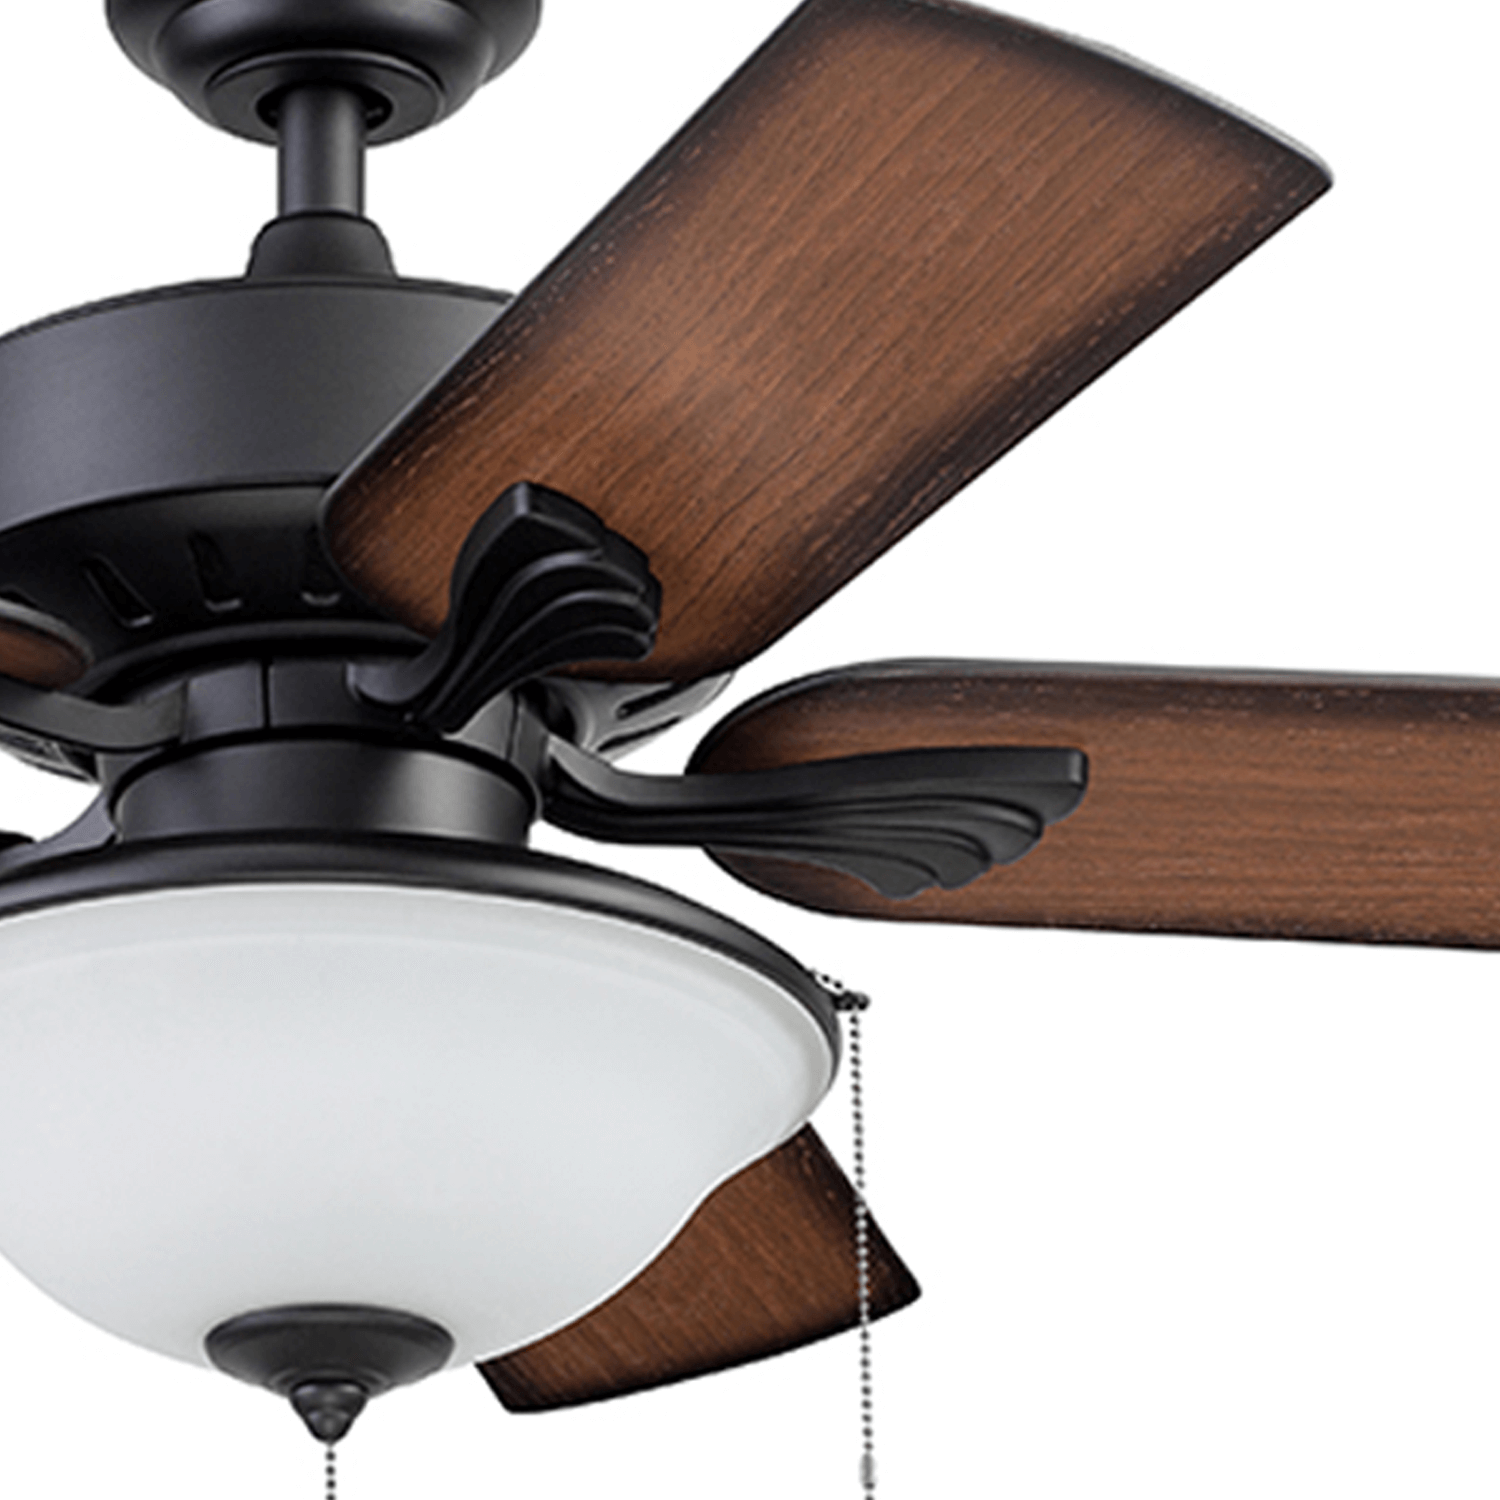 42 Inch Viretta, Matte Black, Pull Chain, Indoor/ Outdoor Ceiling Fan by Prominence Home